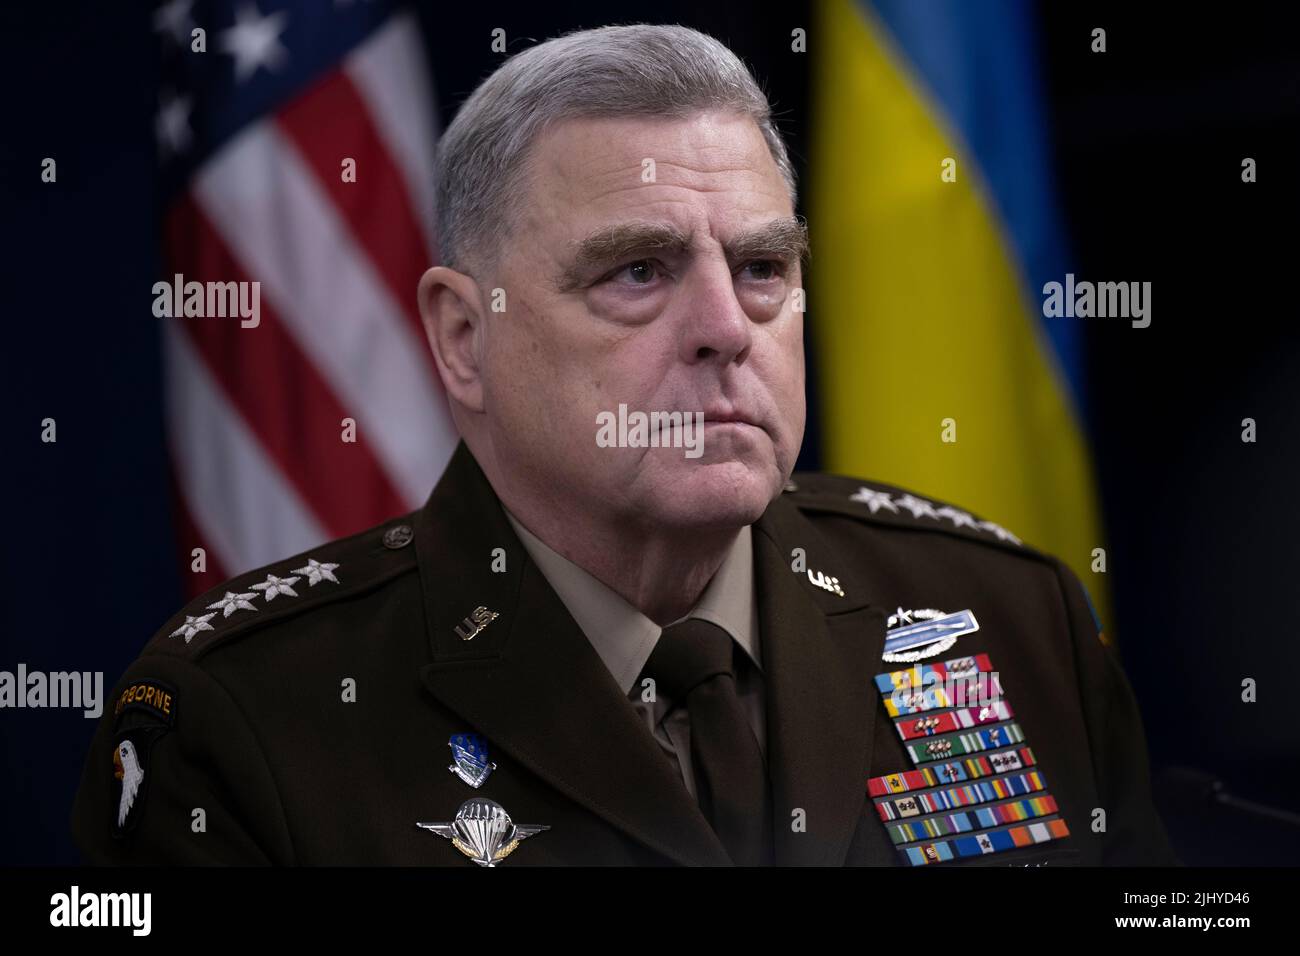 Arlington, United States Of America. 20th July, 2022. Arlington, United States of America. 20 July, 2022. U.S. Chairman of the Joint Chiefs of Staff, Gen. Mark A. Milley during a virtual meeting of the Ukraine Defense Contact Group from the Pentagon, July 20, 2022 in Arlington, Virginia. Credit: Chad J. McNeeley/DOD/Alamy Live News Stock Photo